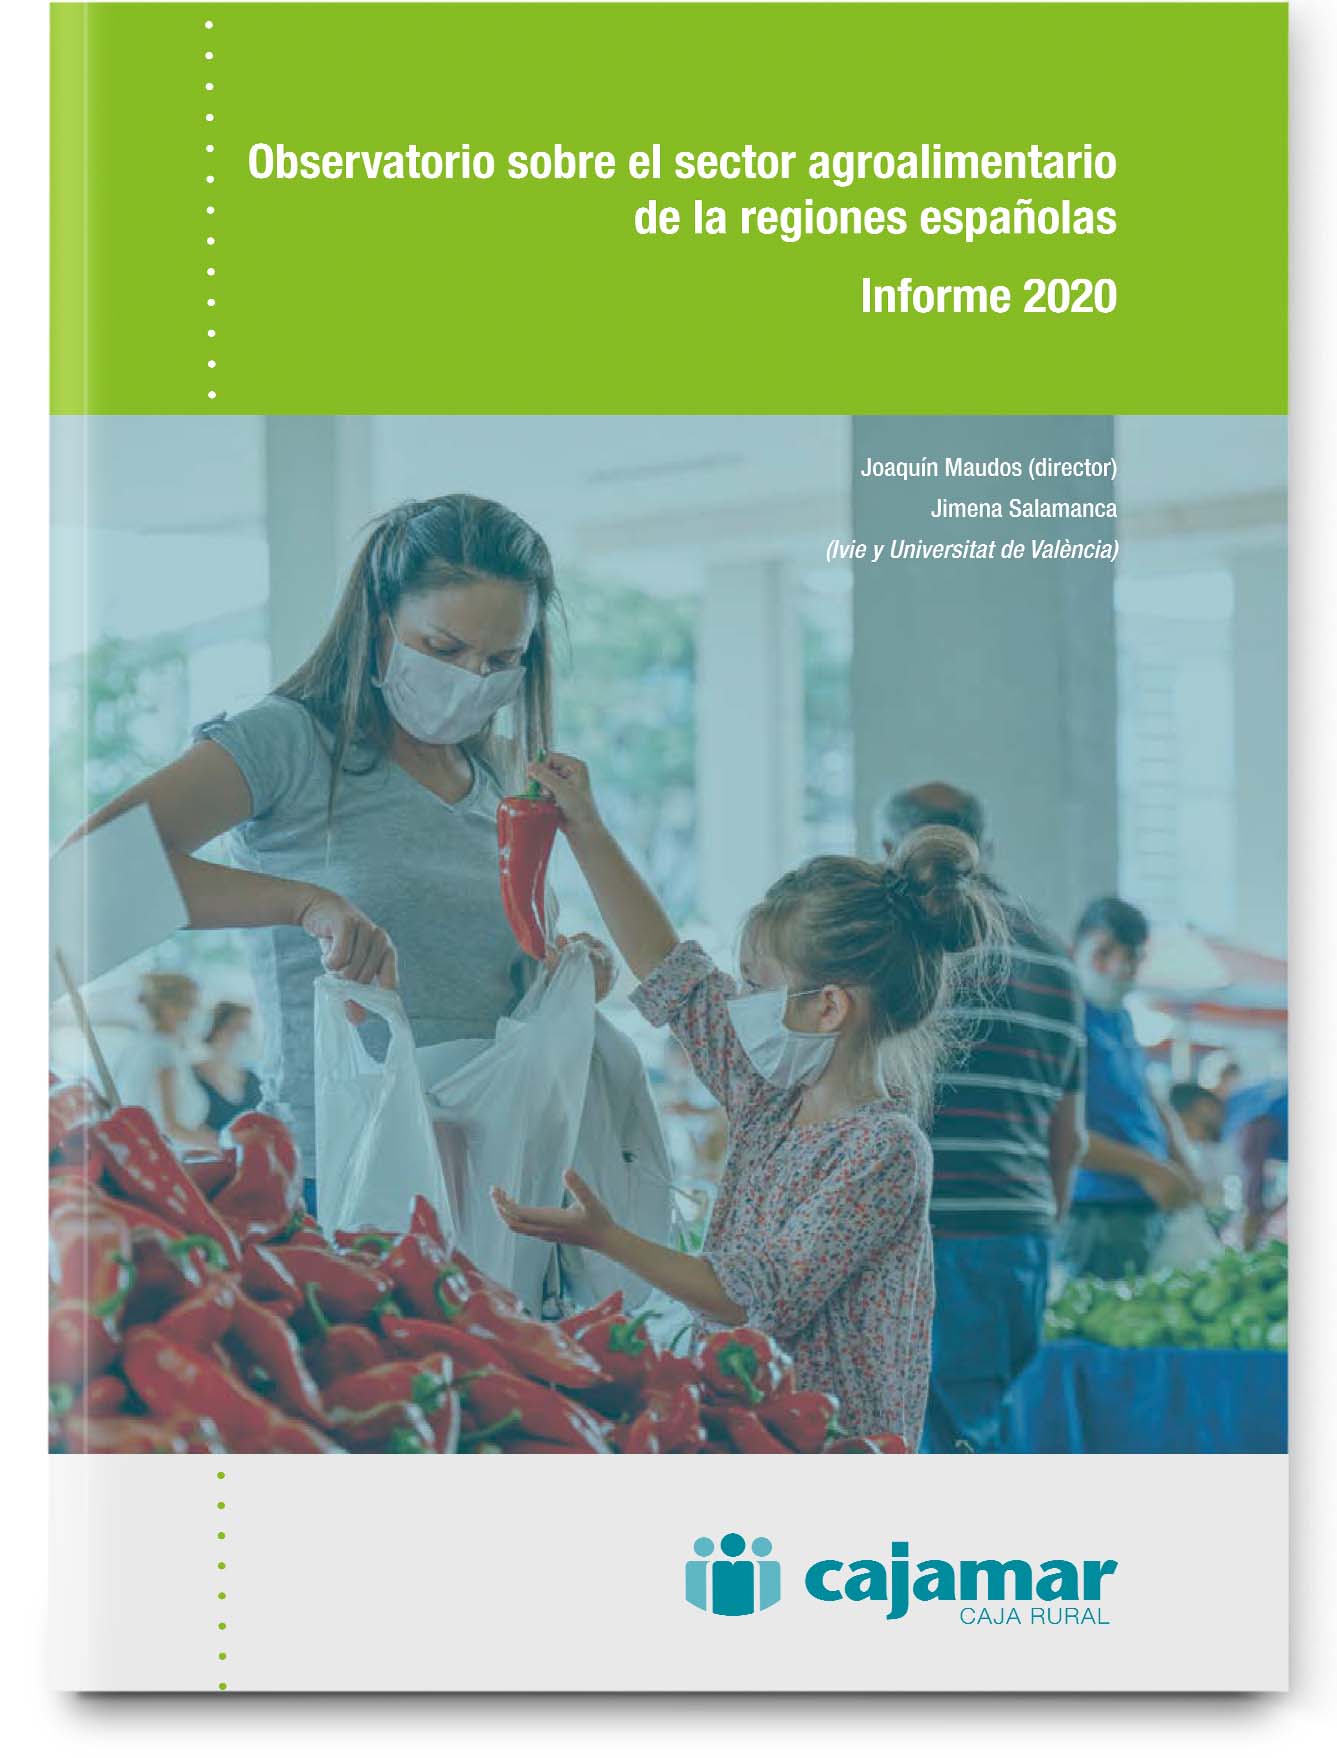 The Spanish agri-food sector in the context of the Spanish regions. 2020 Report